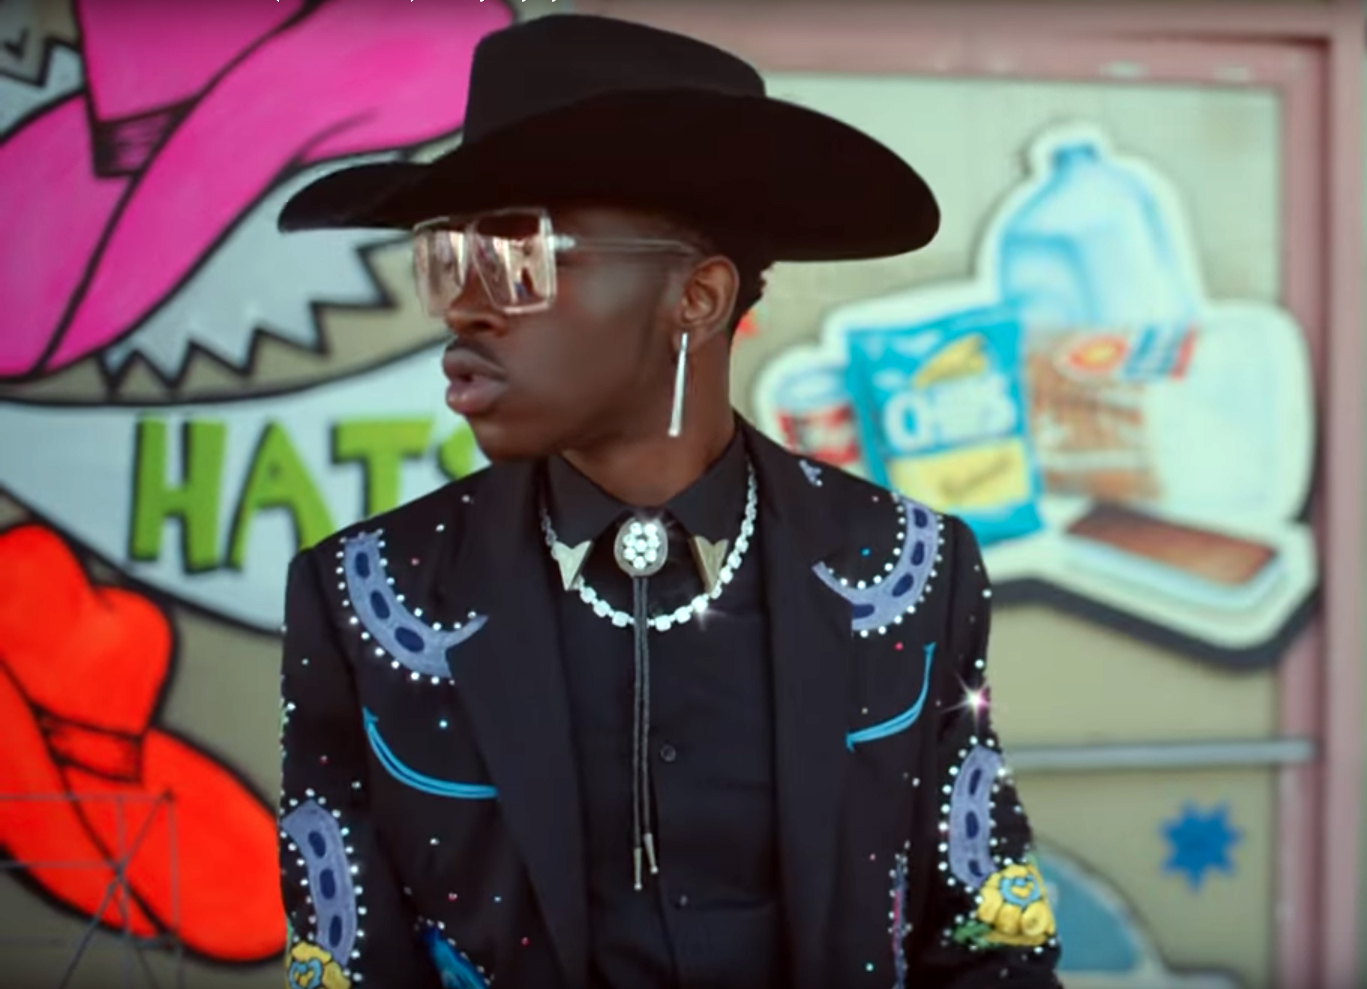 Up-and-coming artist Lil Nas X released his country-rap single "Old To...